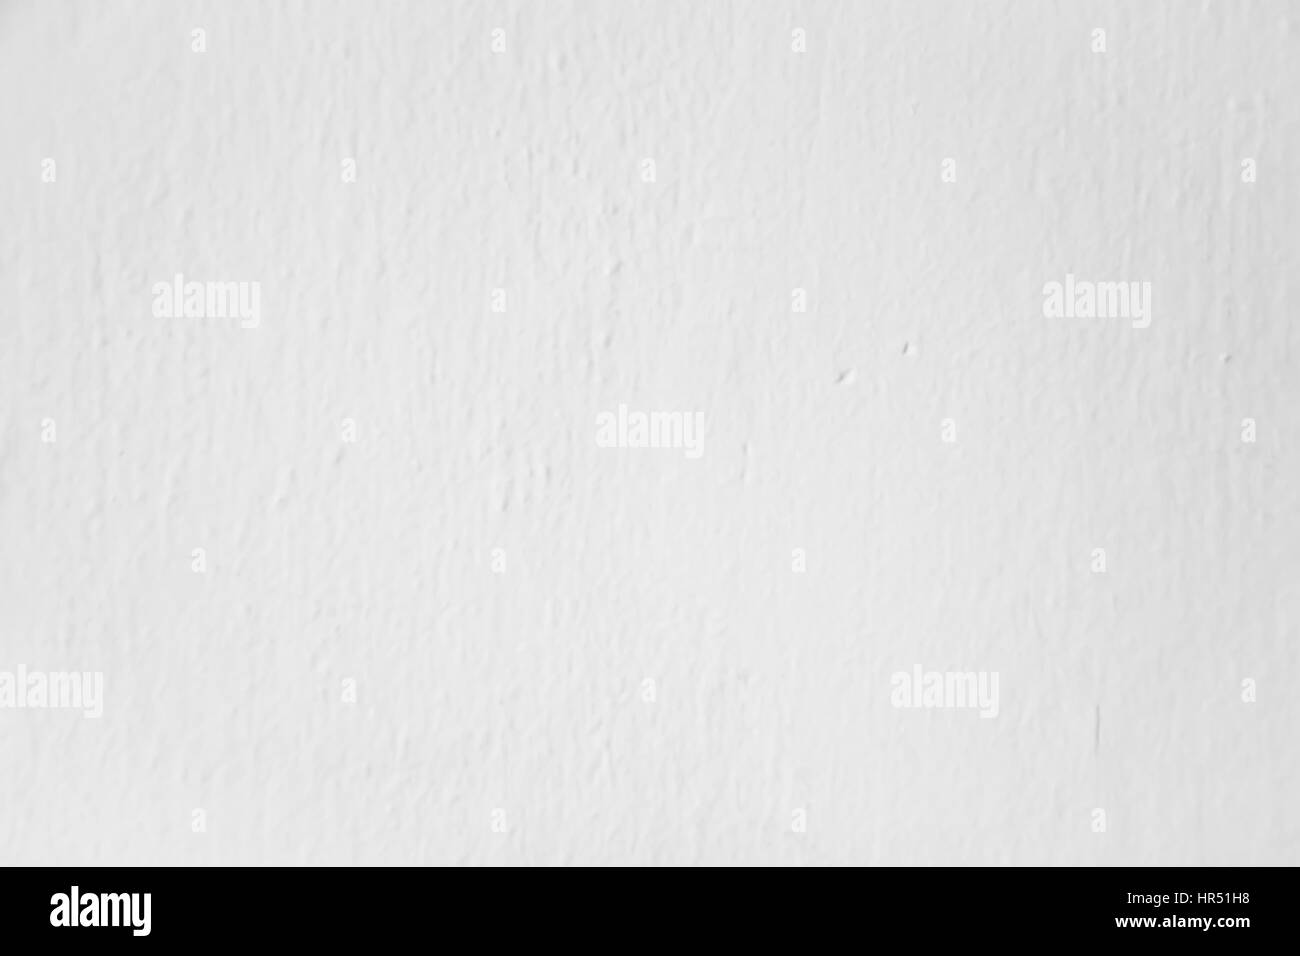 Plywood texture Black and White Stock Photos & Images - Alamy